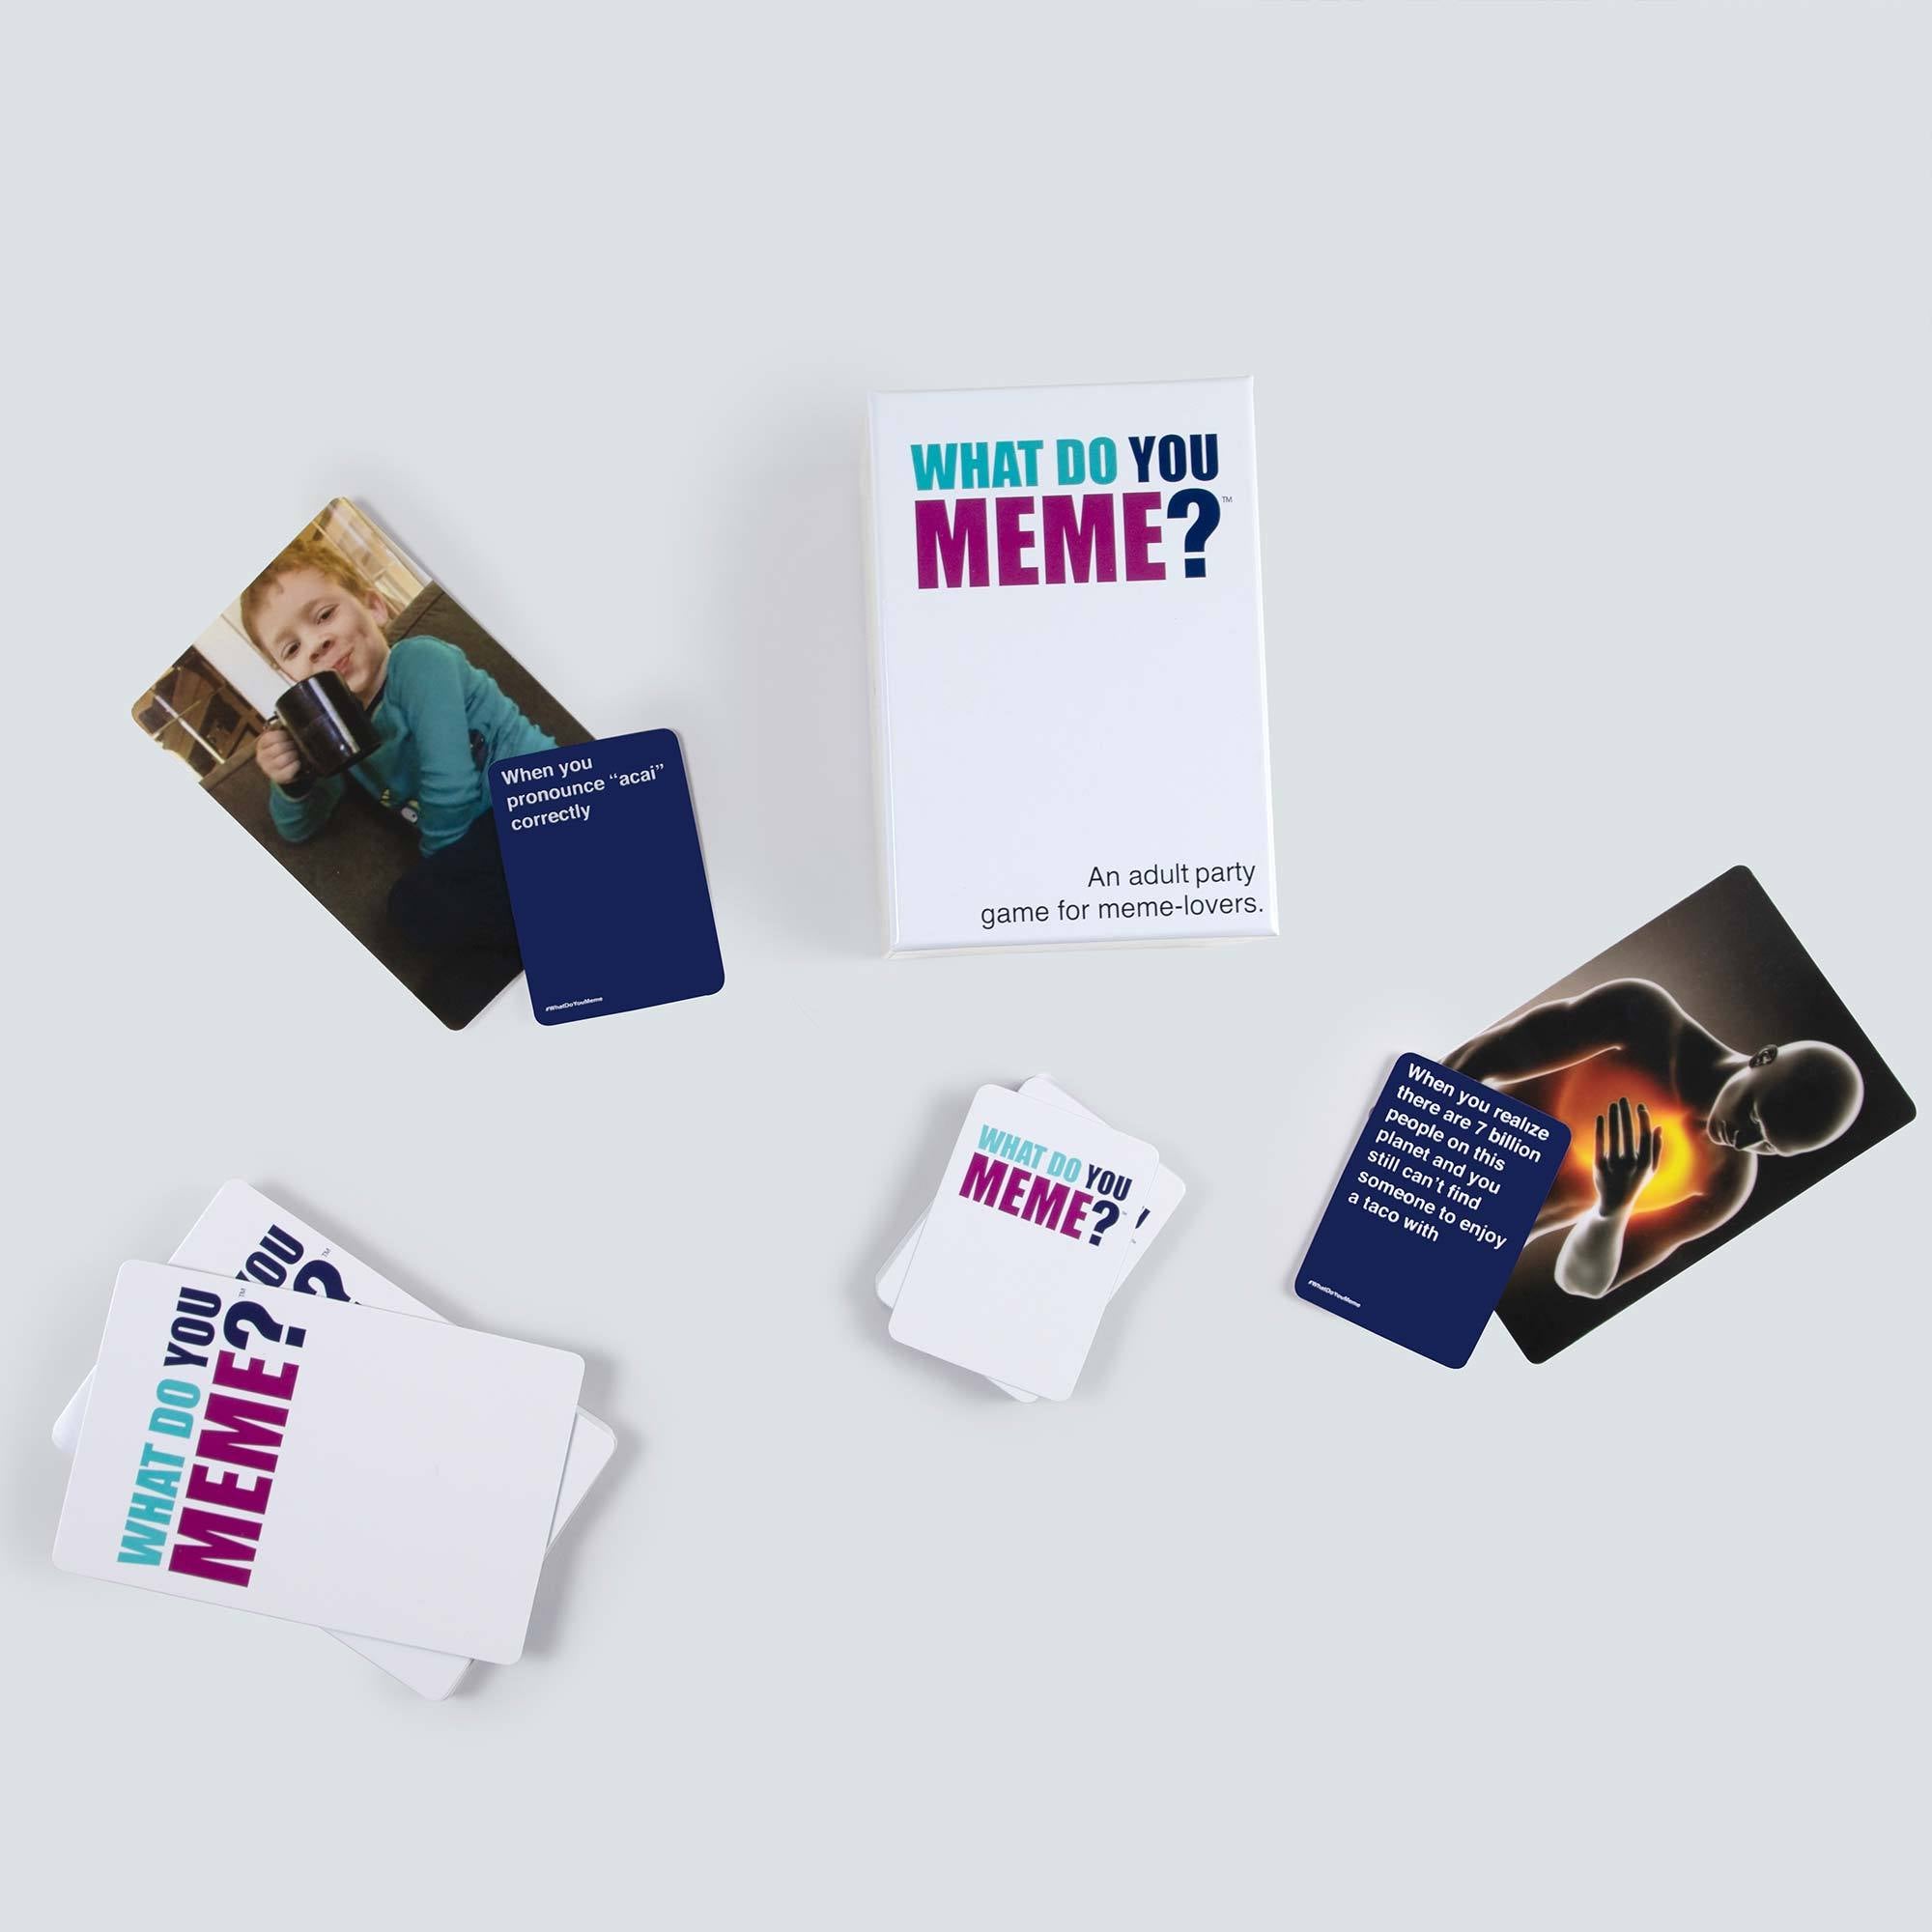 What Do You Meme? - On The Go